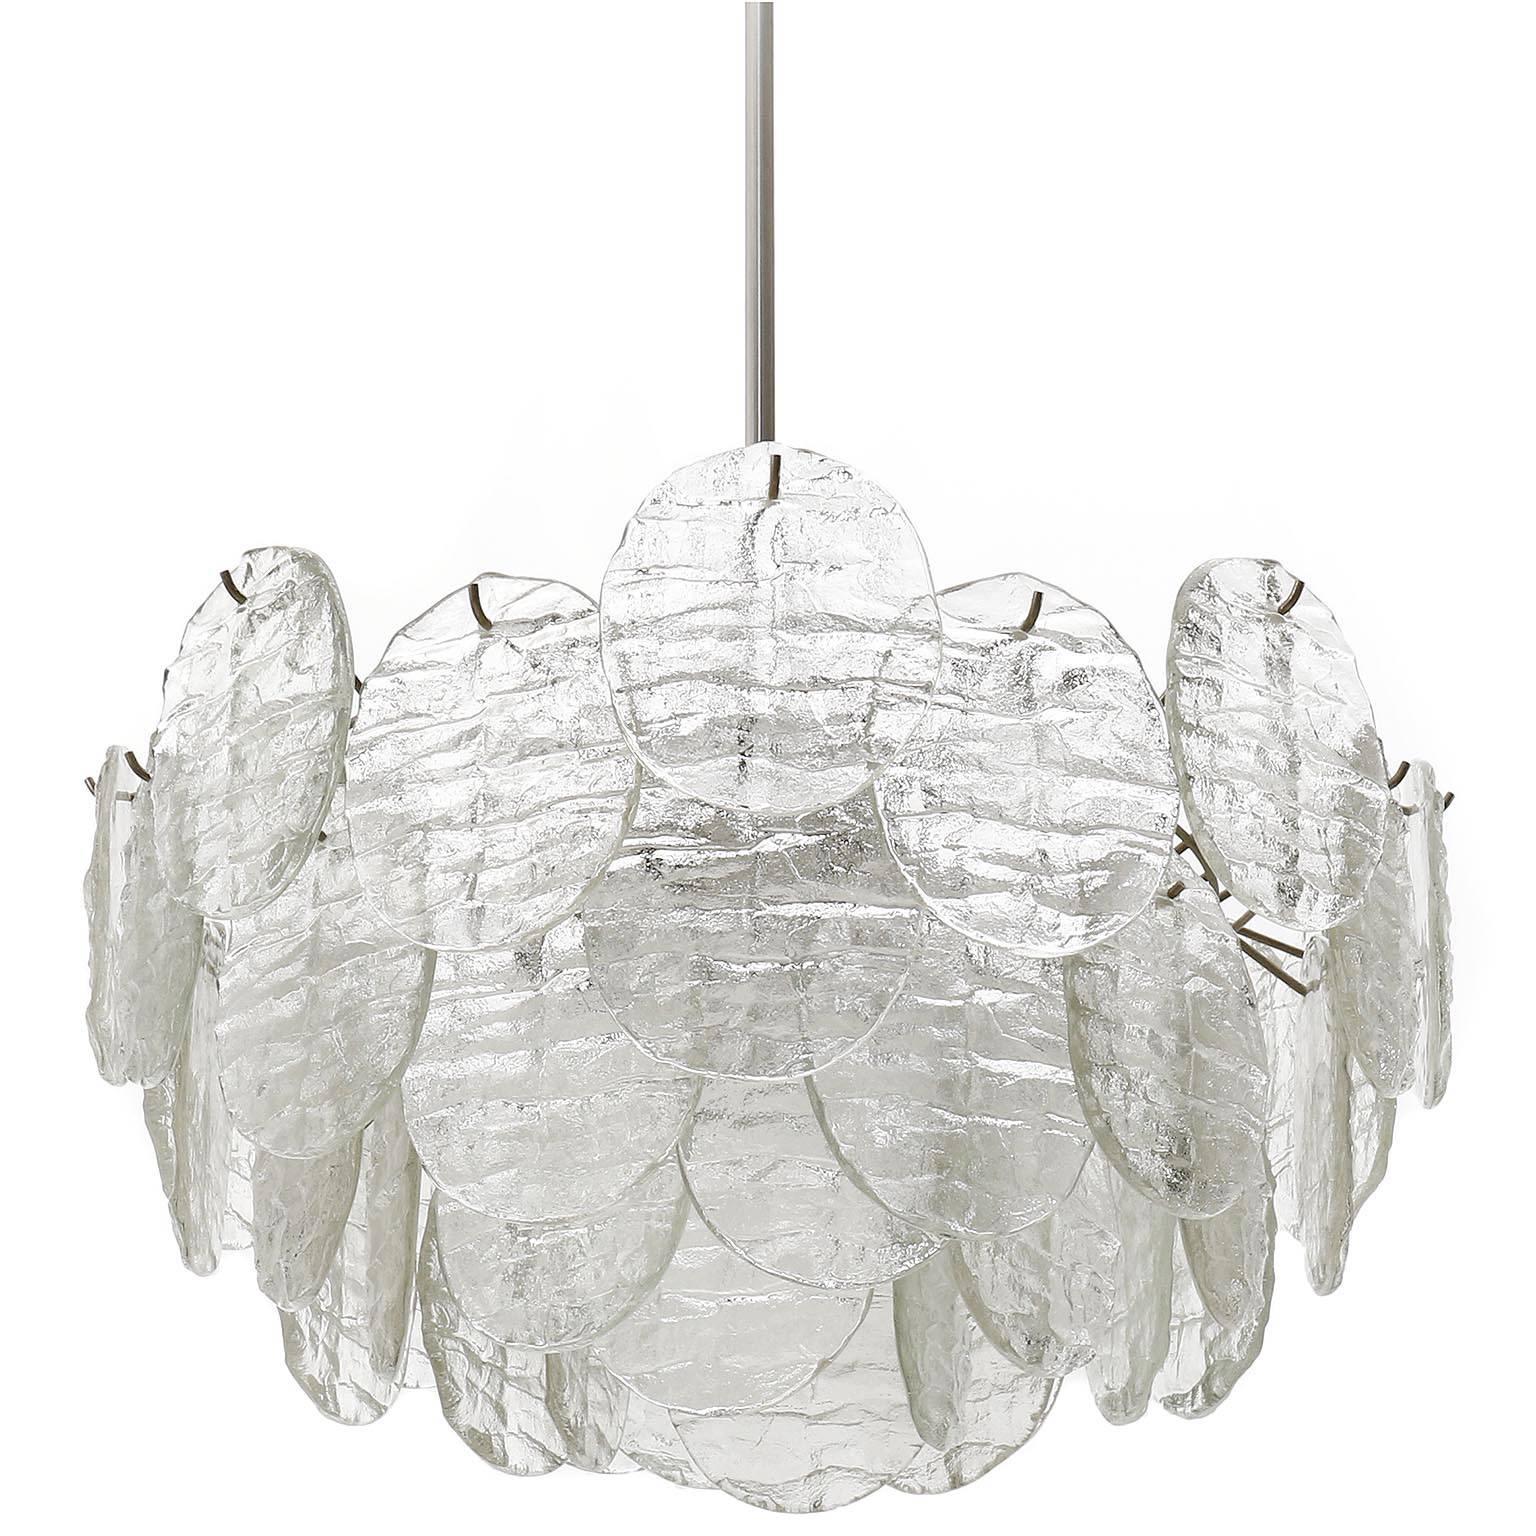 One of two large light fixtures model 'Blatt' (Blatt is the German word for leaf) by J.T. Kalmar, Austria, manufactured in Mid-Century, circa 1970 (late 1960s or early 1970s).
44 disc shaped clear glasses in the form of leaves hang on a